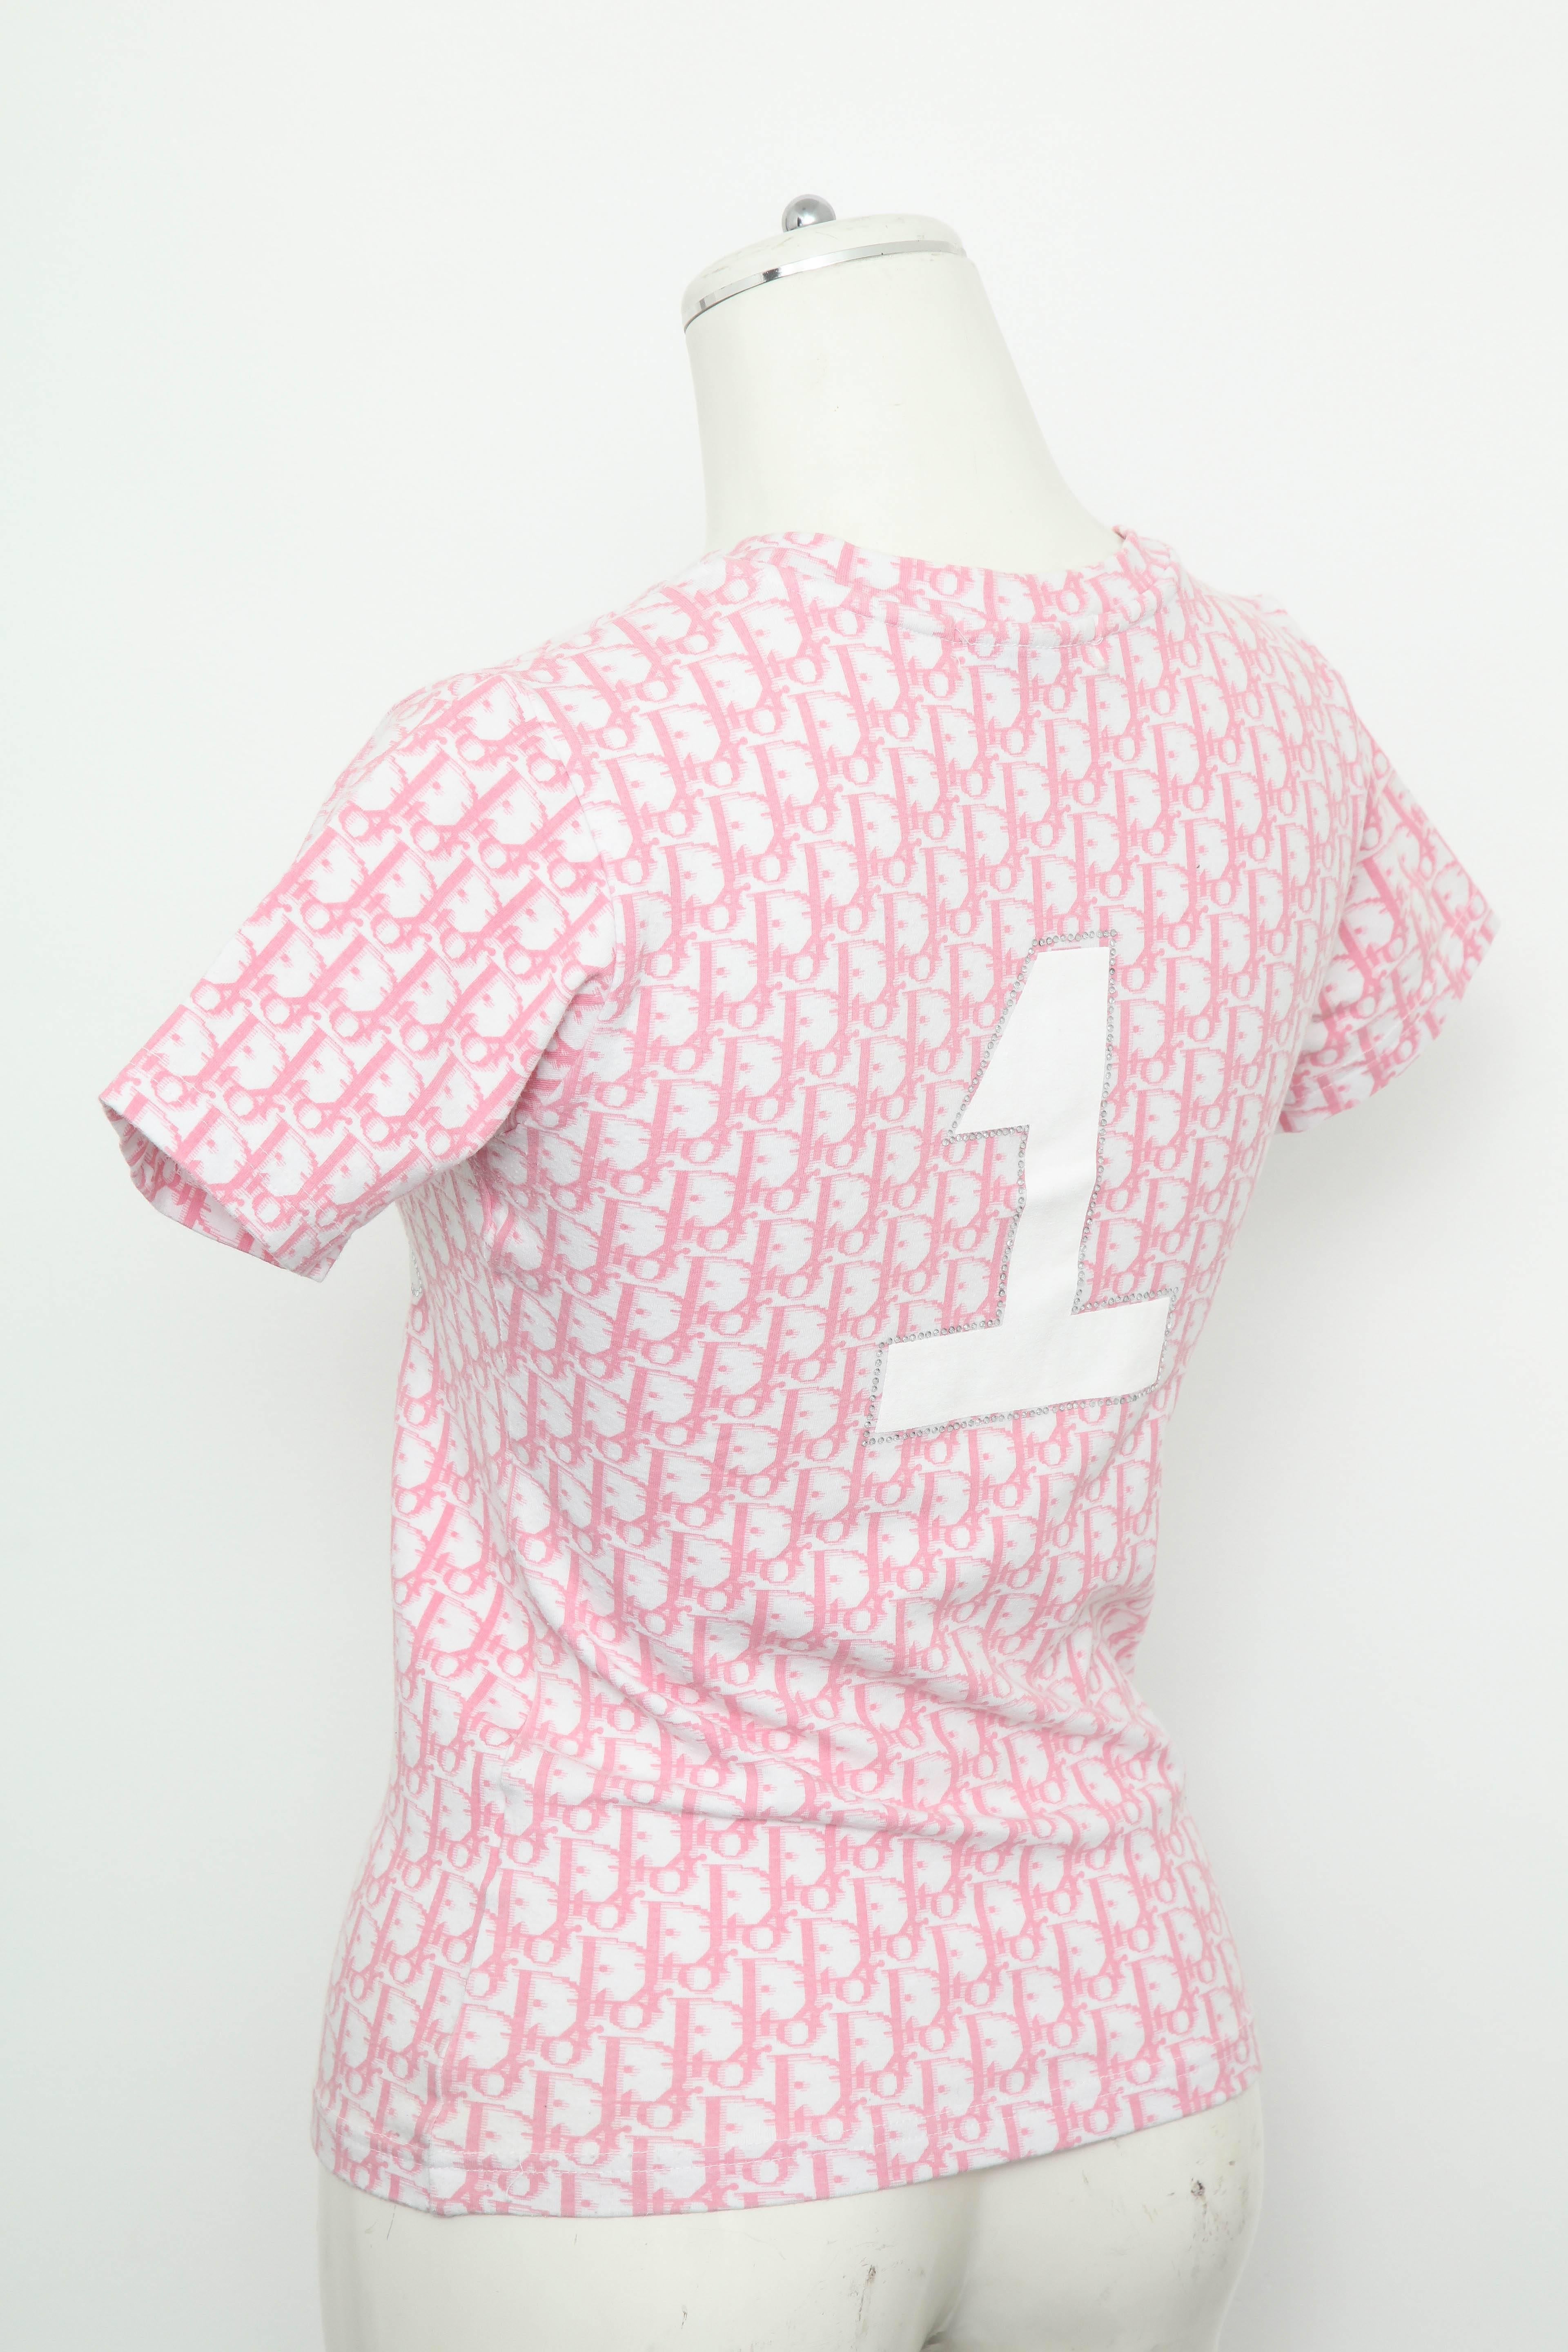 Christian Dior by John Galliano Pink Trotter Logo Shirt For Sale 1